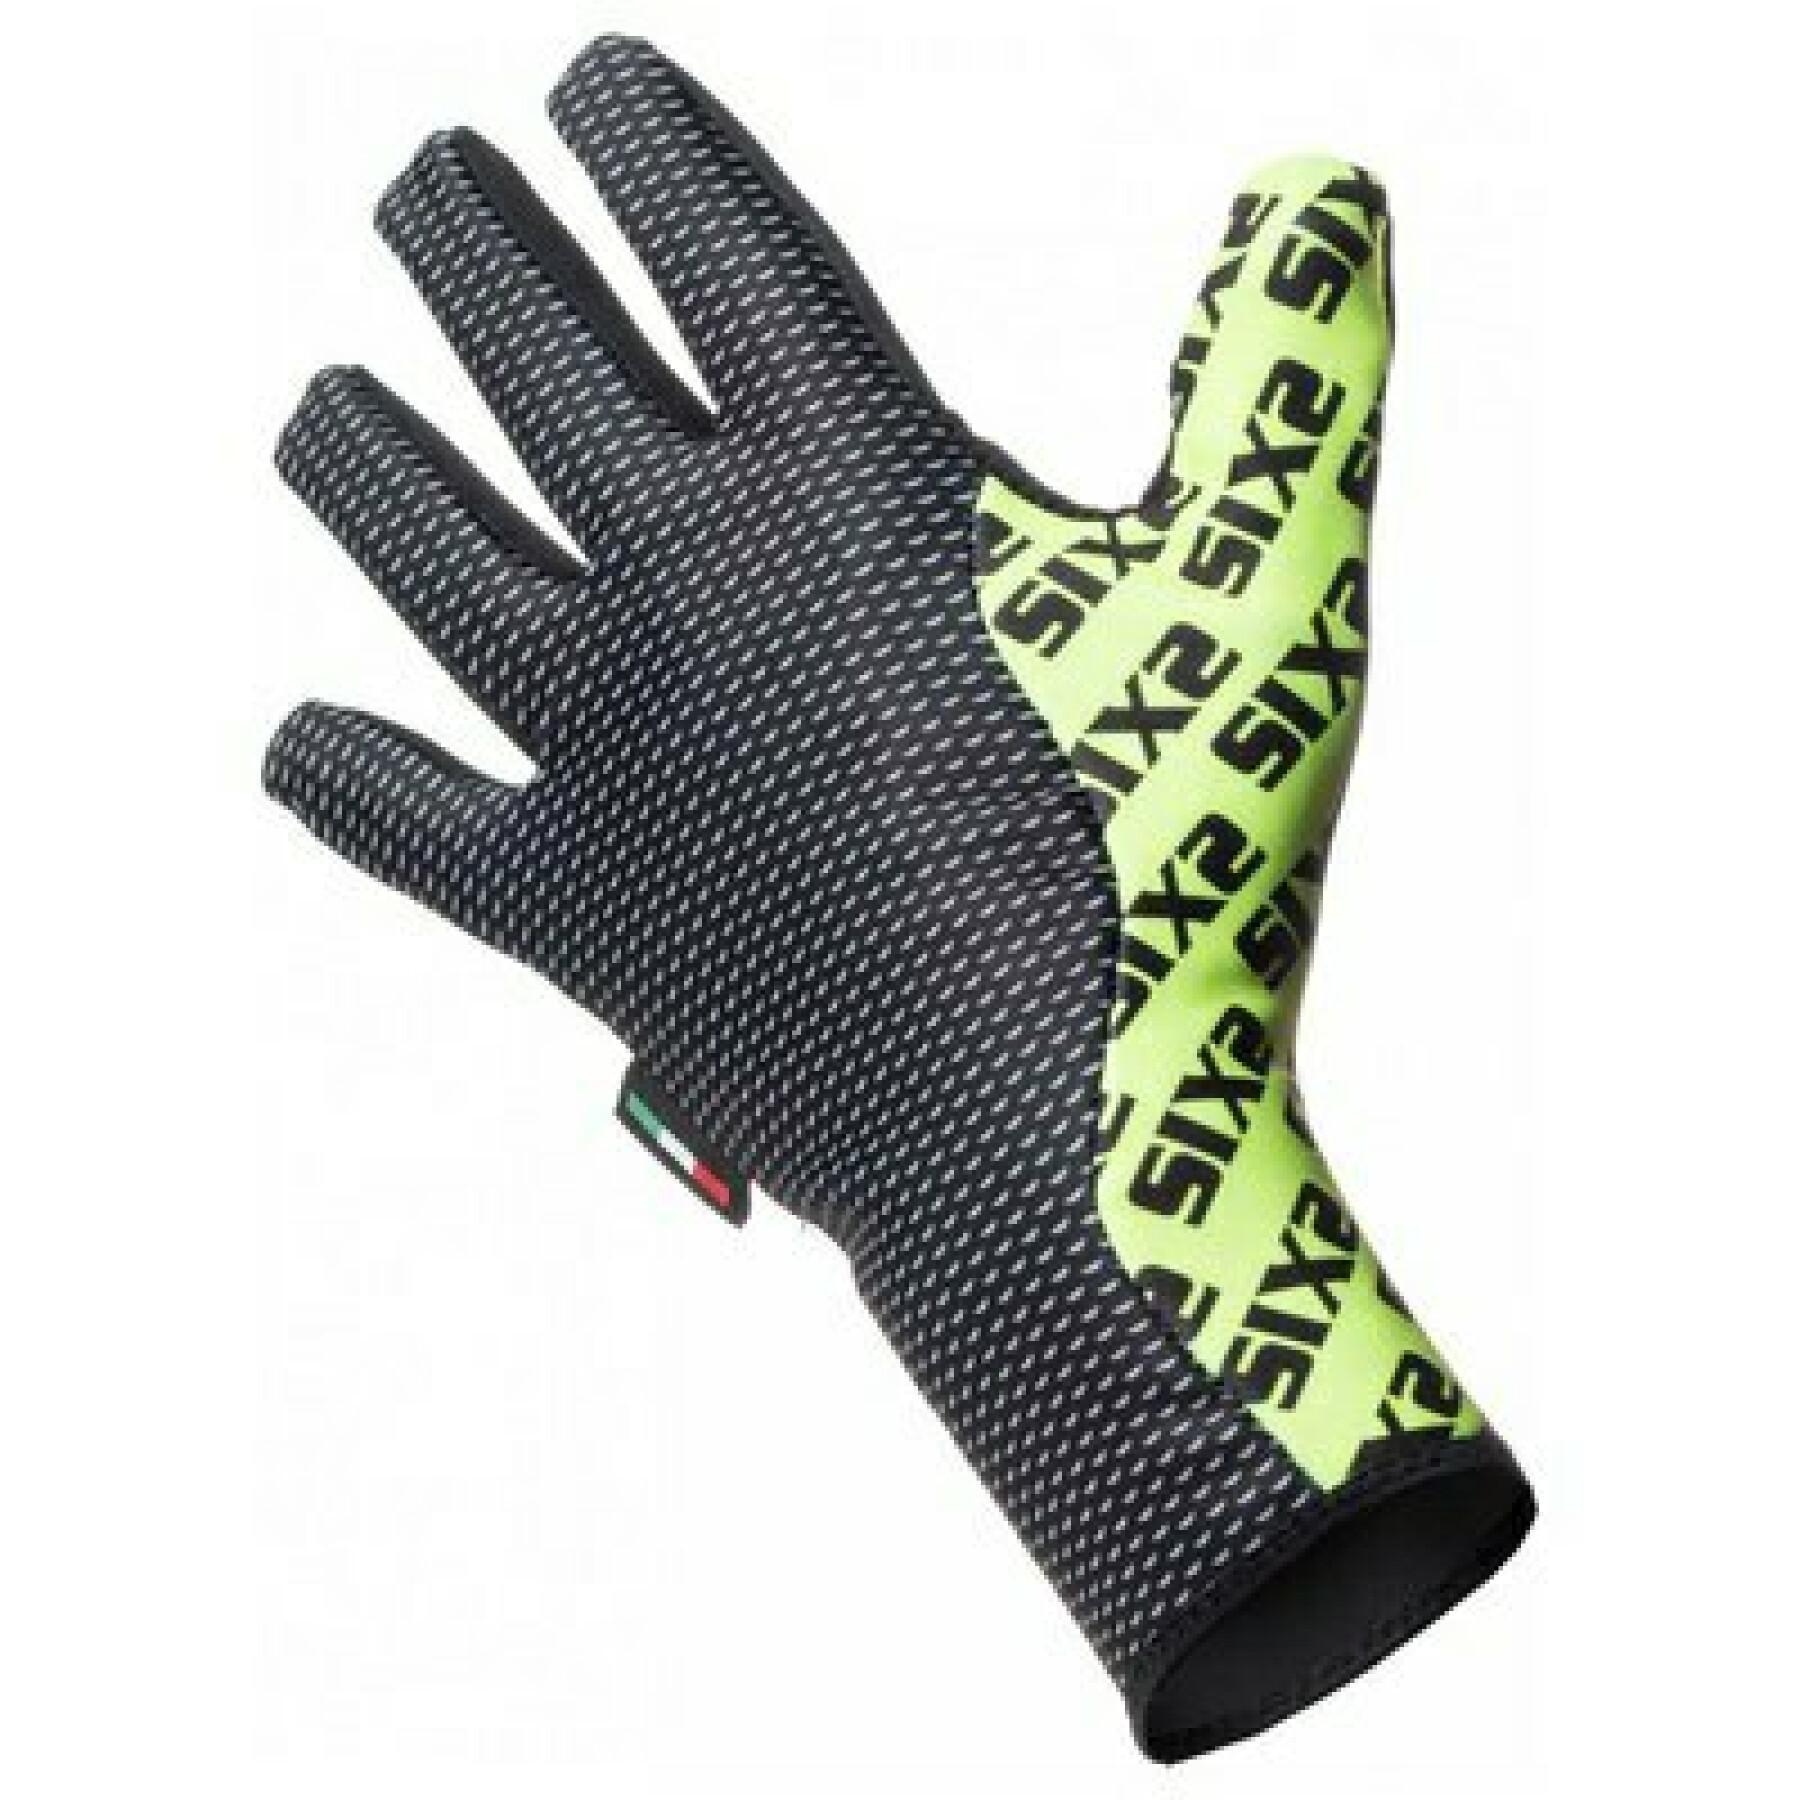 Winter gloves Sixs